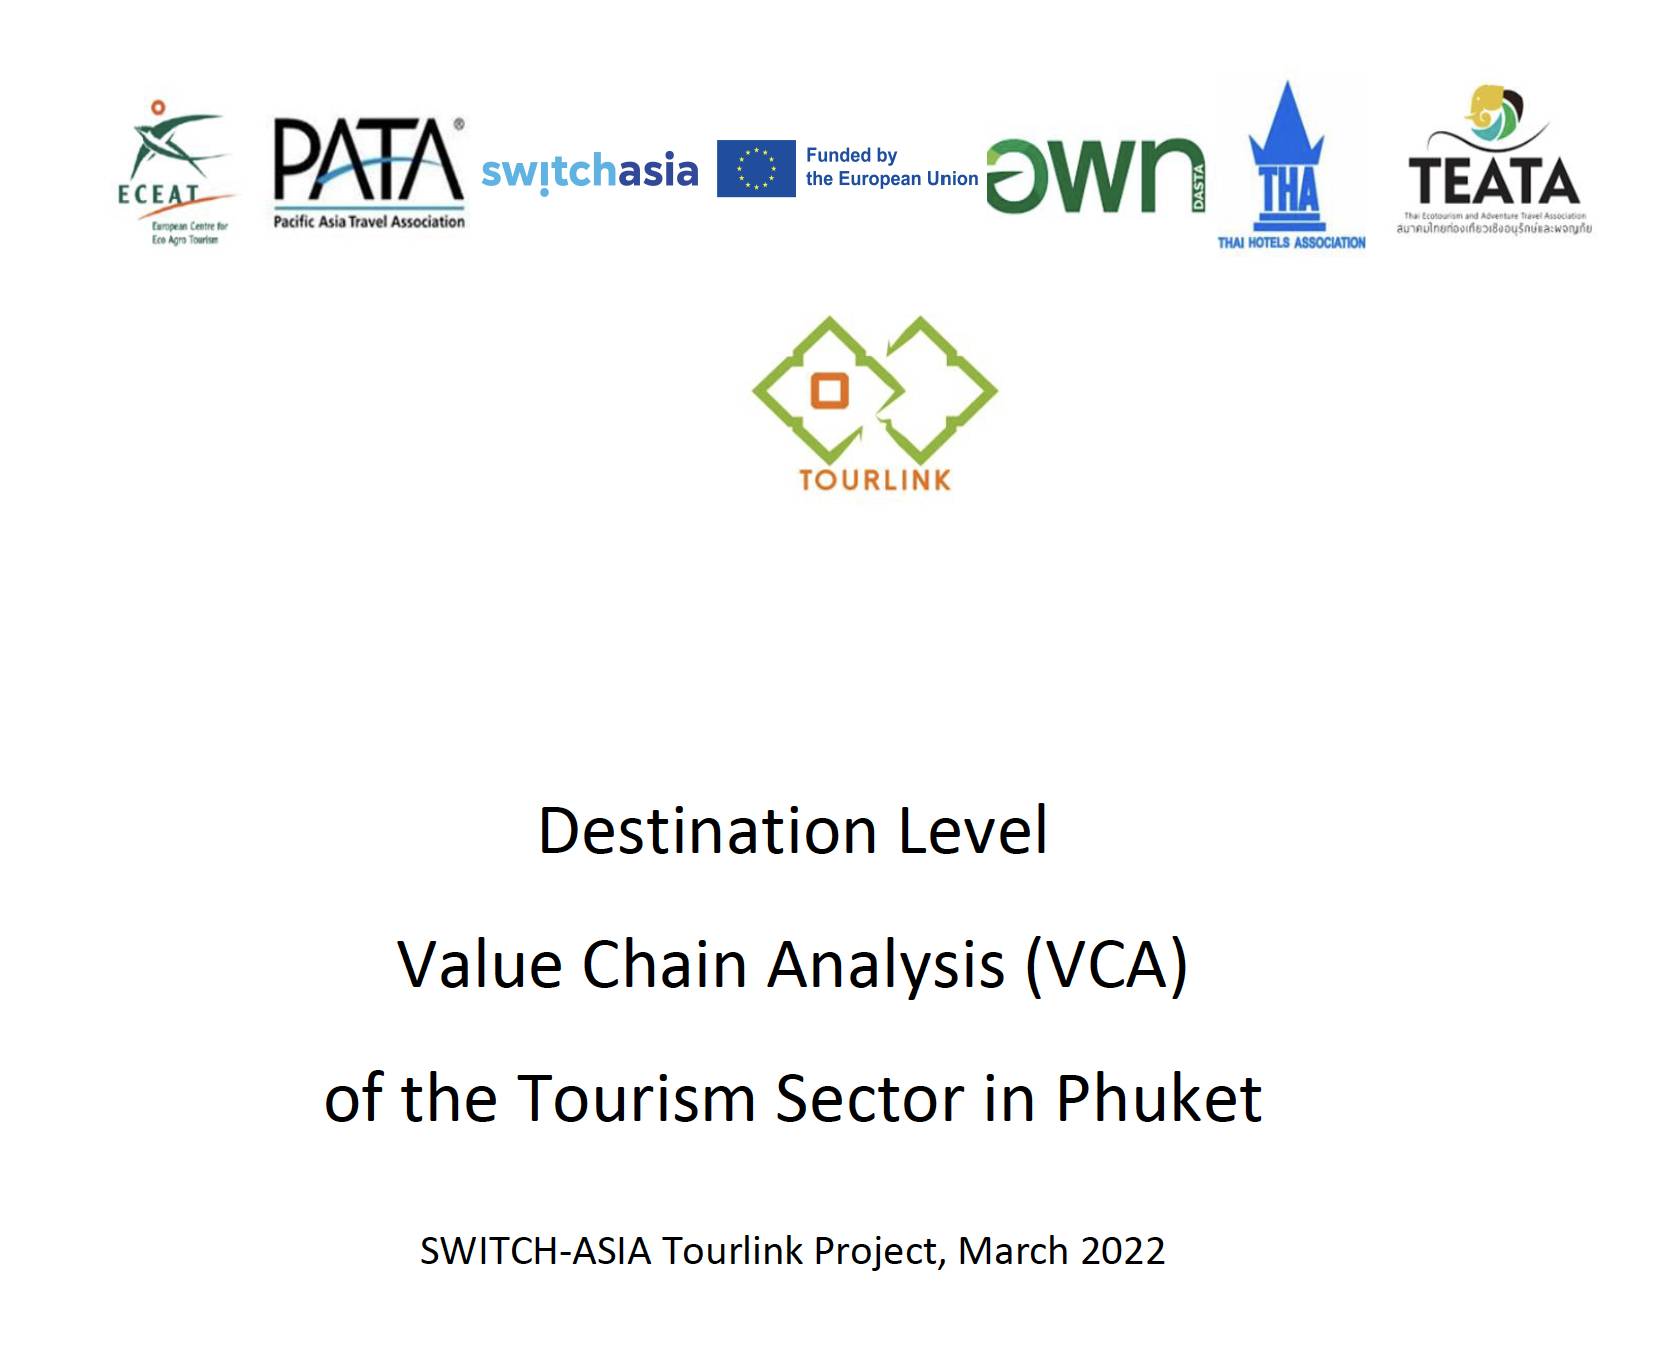 Destination Level Value Chain Analysis (VCA) of the Tourism Sector in Phuket